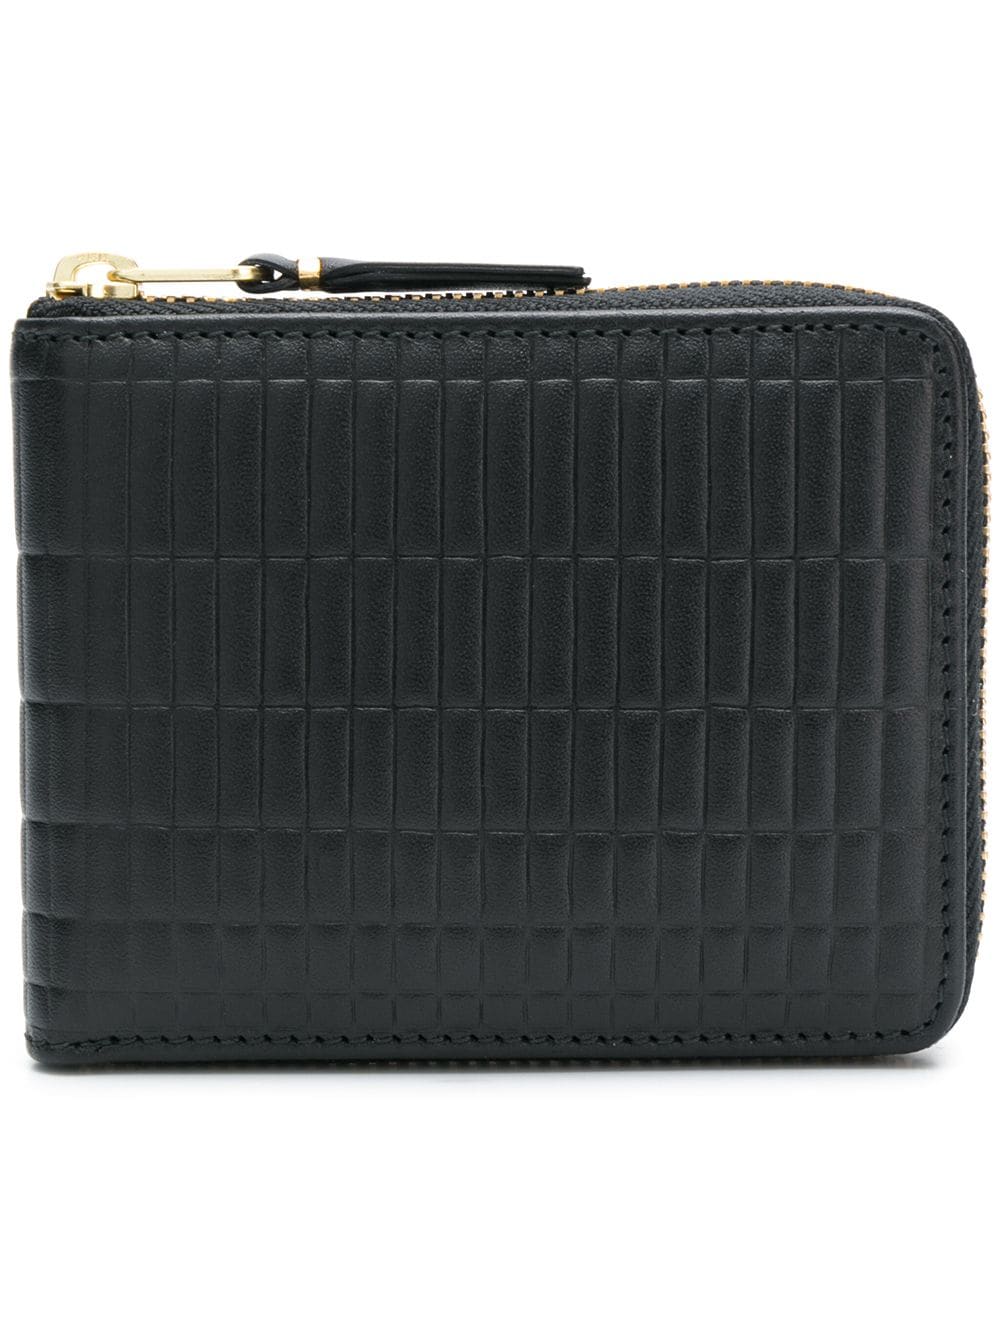 Comme des Garçons embossed checkered wallet with zip opening in black